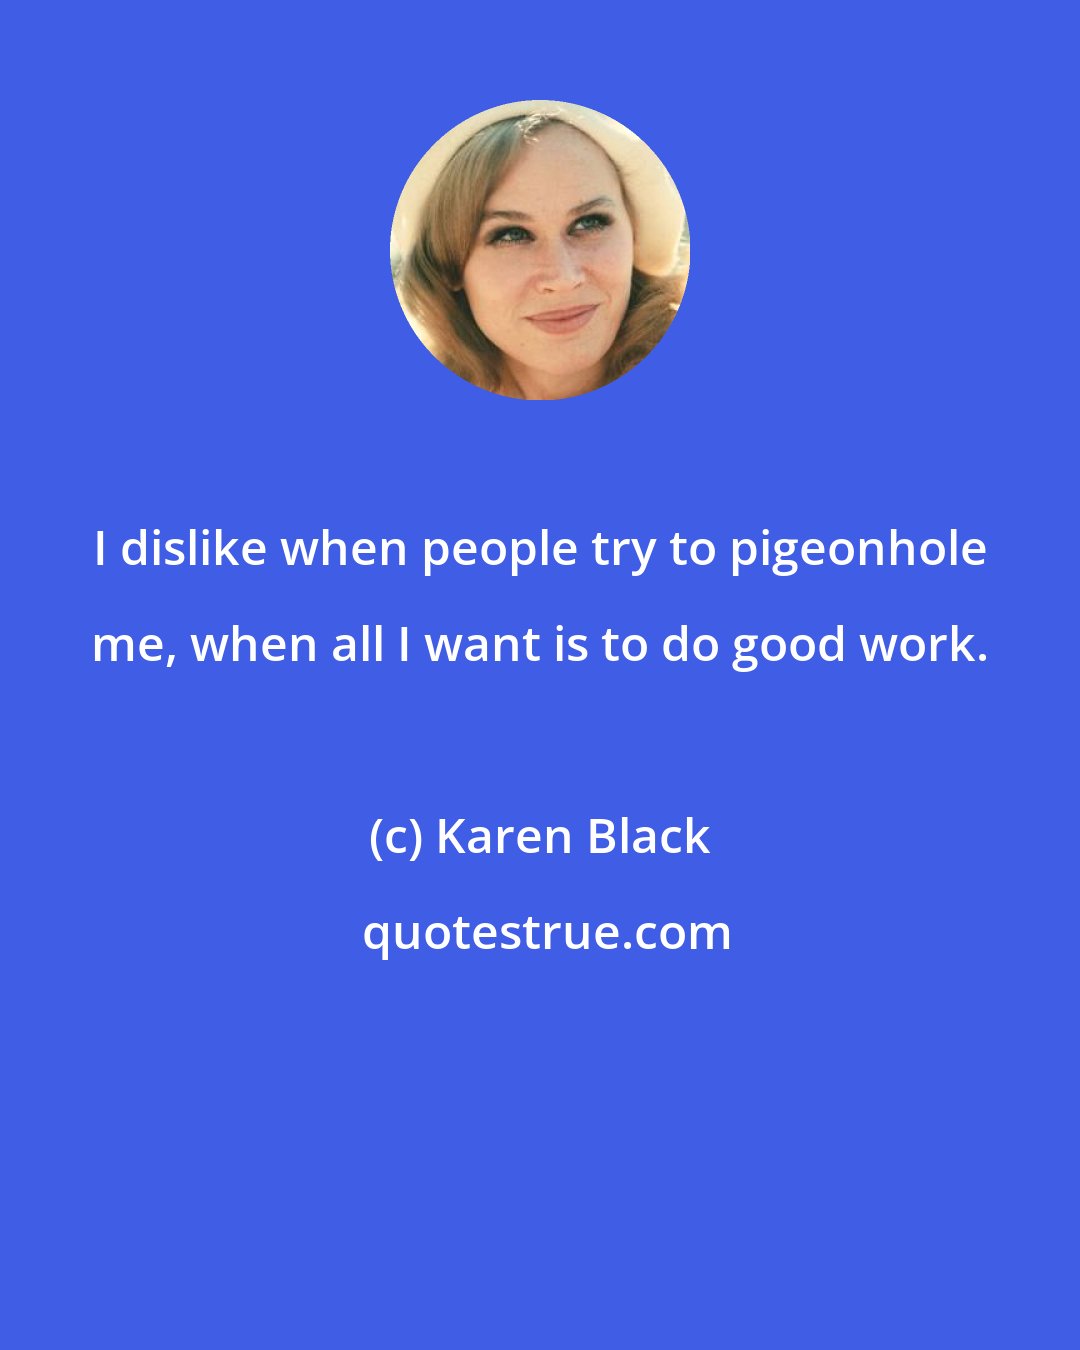 Karen Black: I dislike when people try to pigeonhole me, when all I want is to do good work.